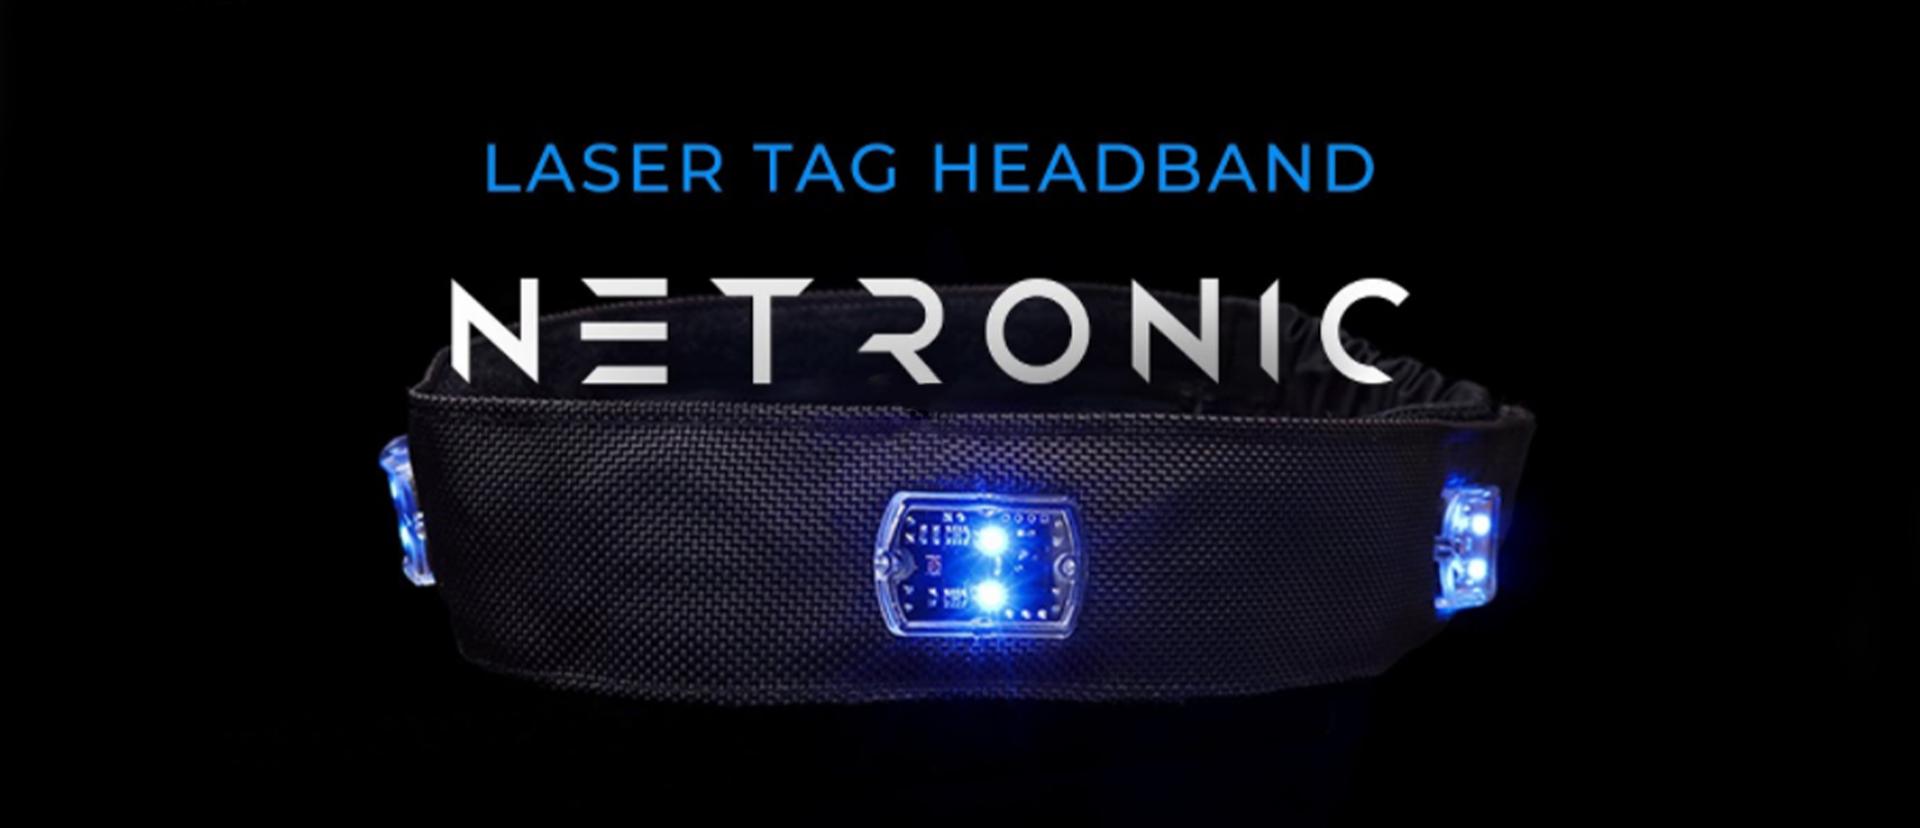 Video-review of the NETRONIC headband